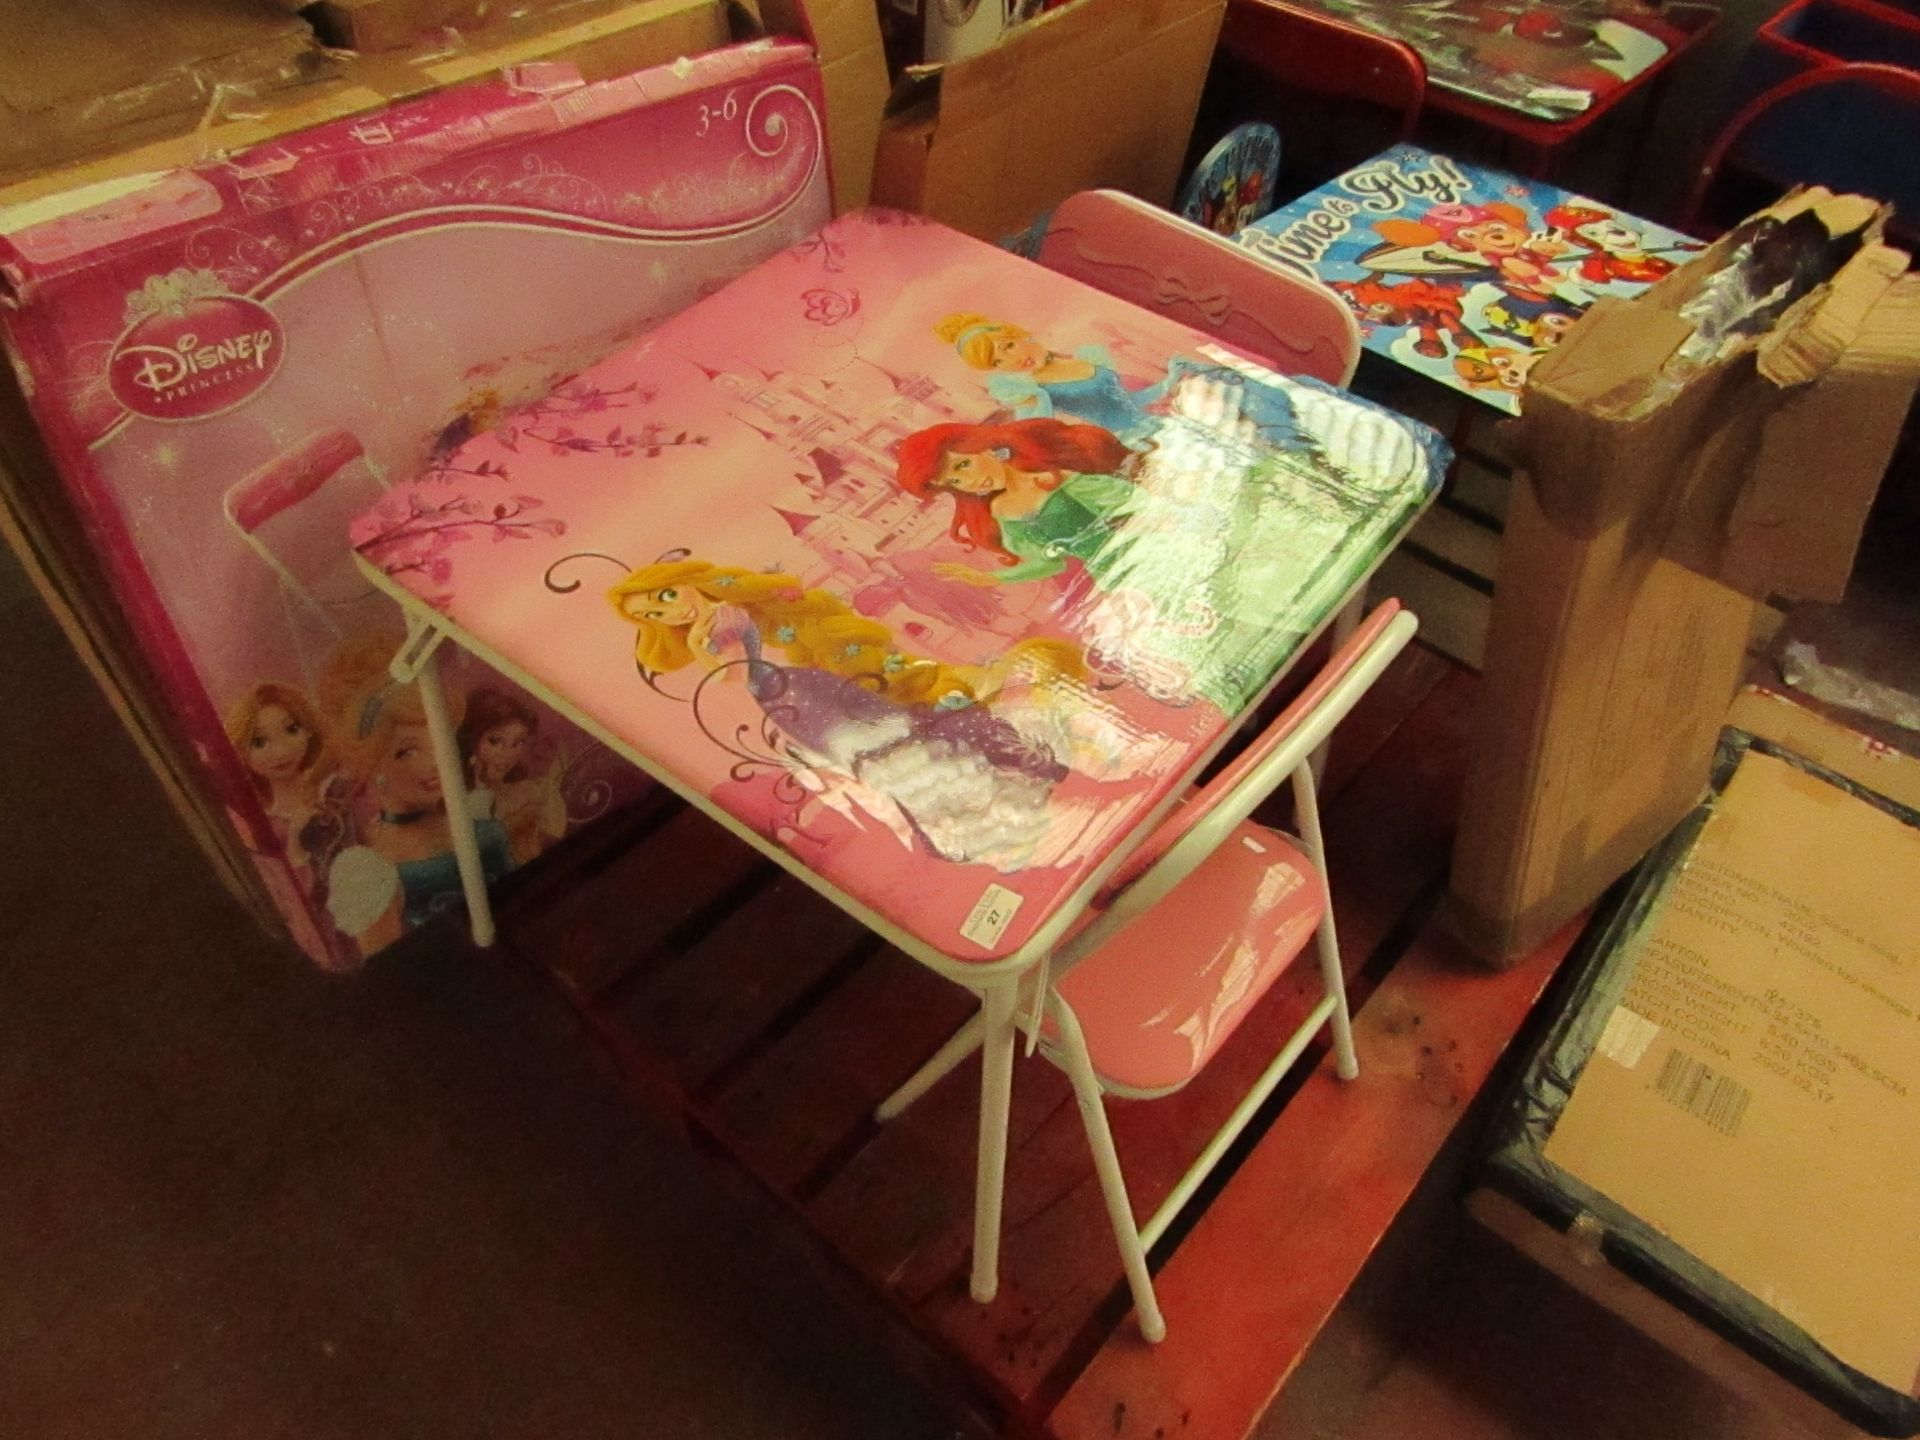 Disney Princess - Folding Table & Chairs(3-6 Years) - Very Good Condition & Looks Complete box.